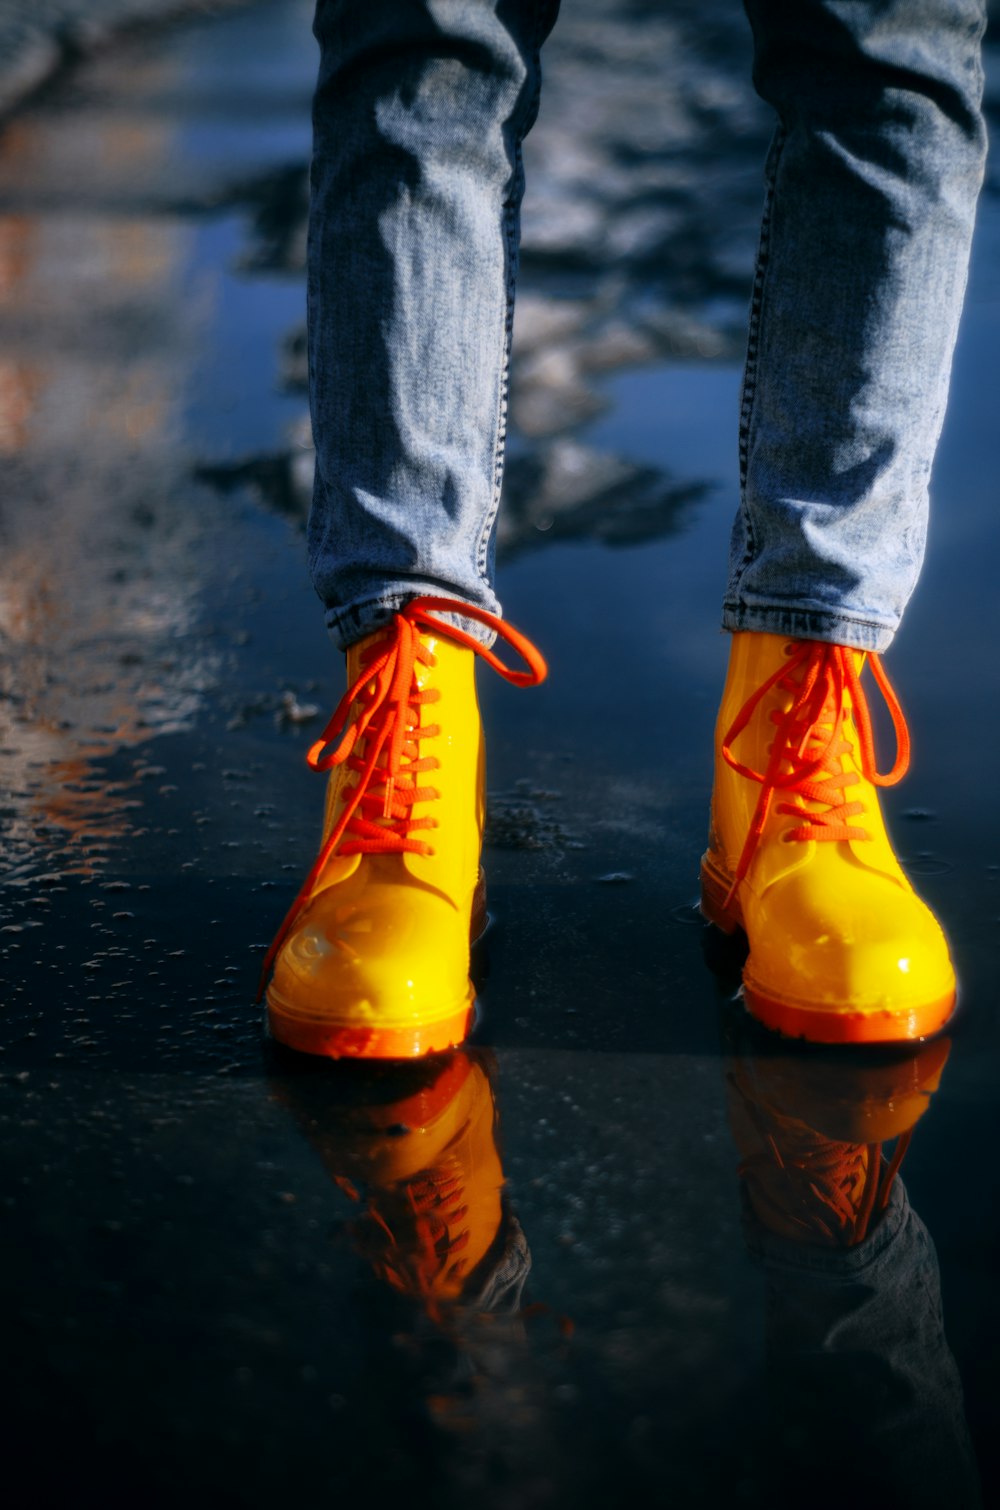 a person wearing yellow boots standing on a wet surface